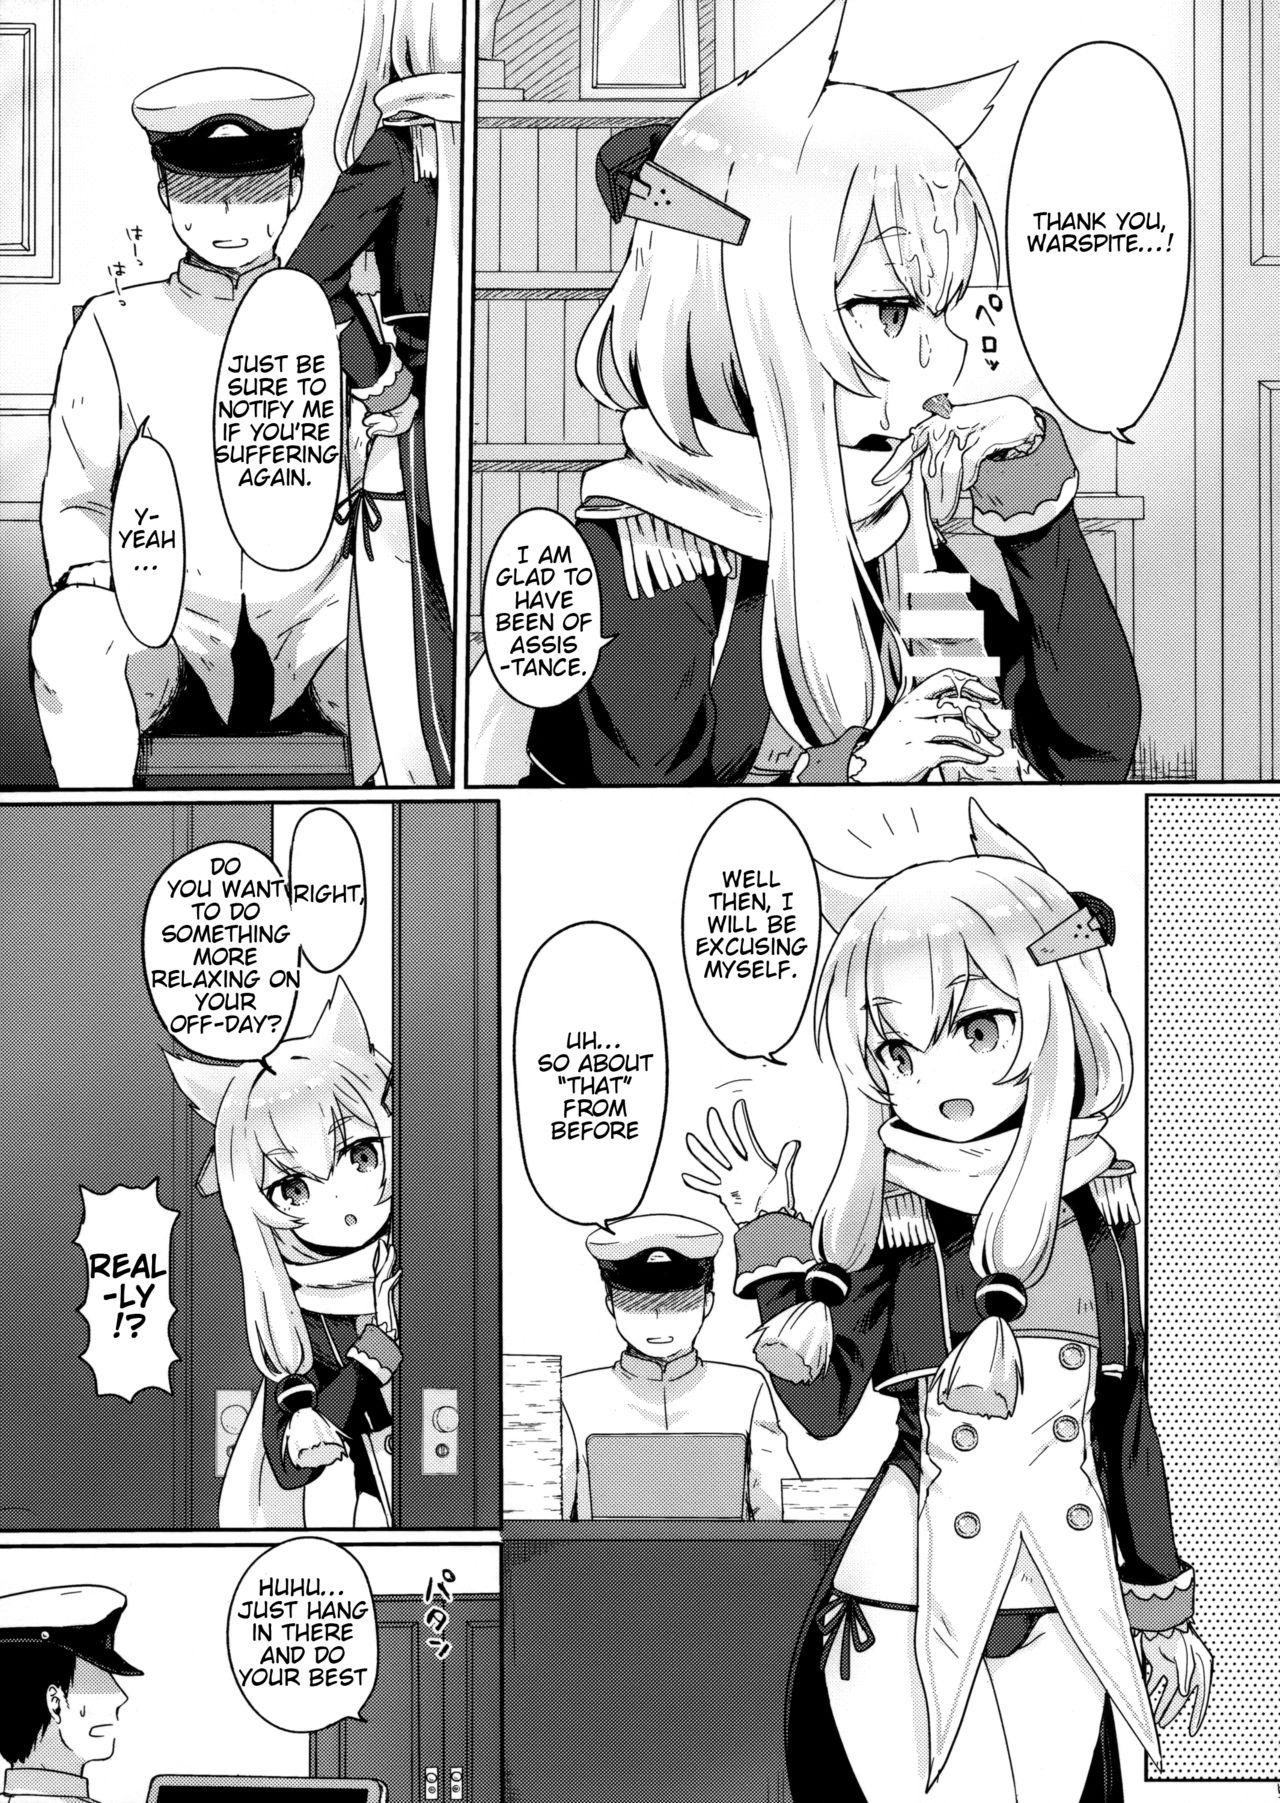 Chacal Little Old Lady - Azur lane Assfuck - Page 6